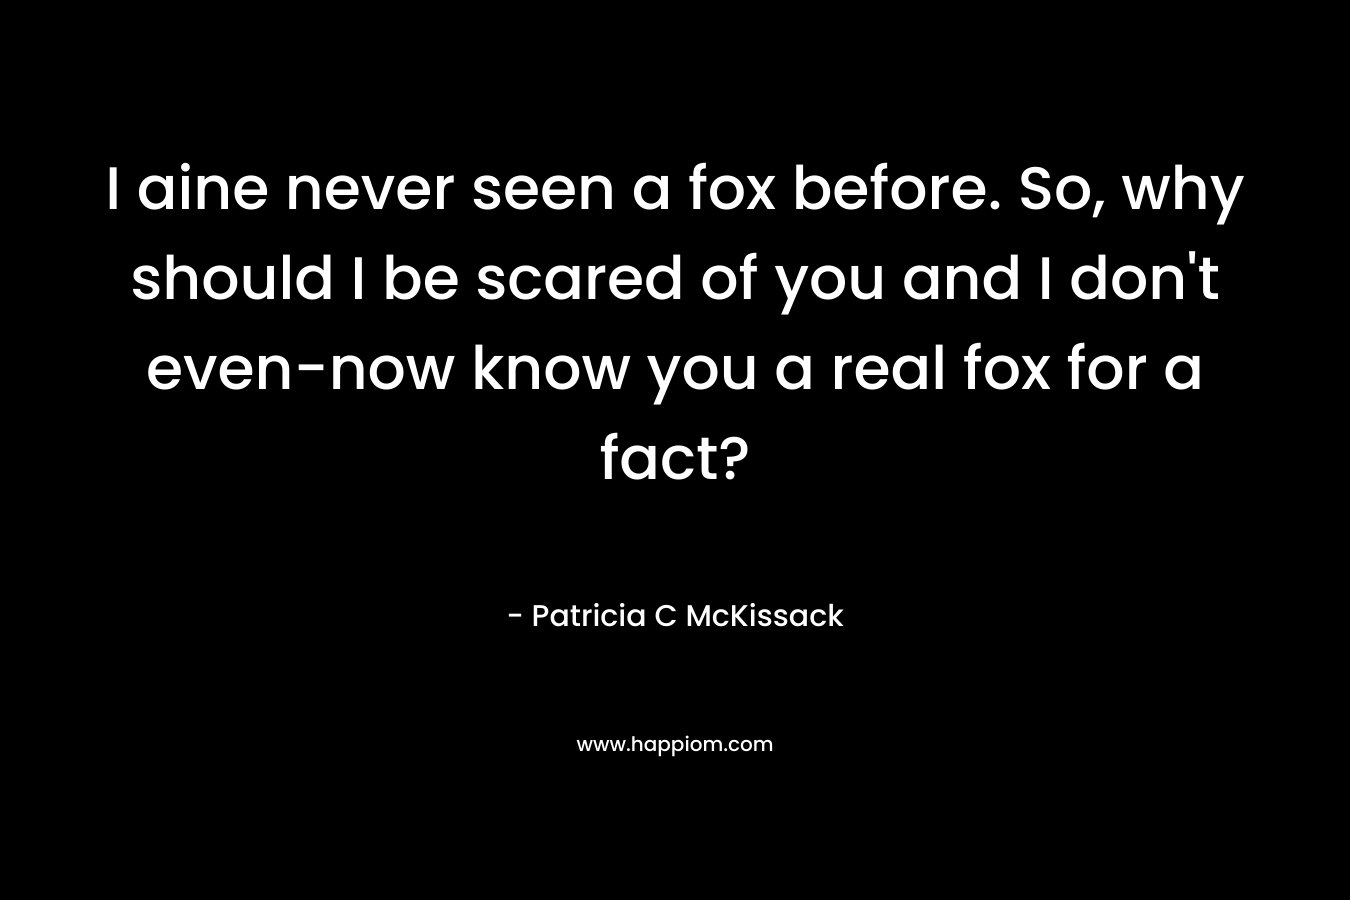 I aine never seen a fox before. So, why should I be scared of you and I don’t even-now know you a real fox for a fact? – Patricia C McKissack